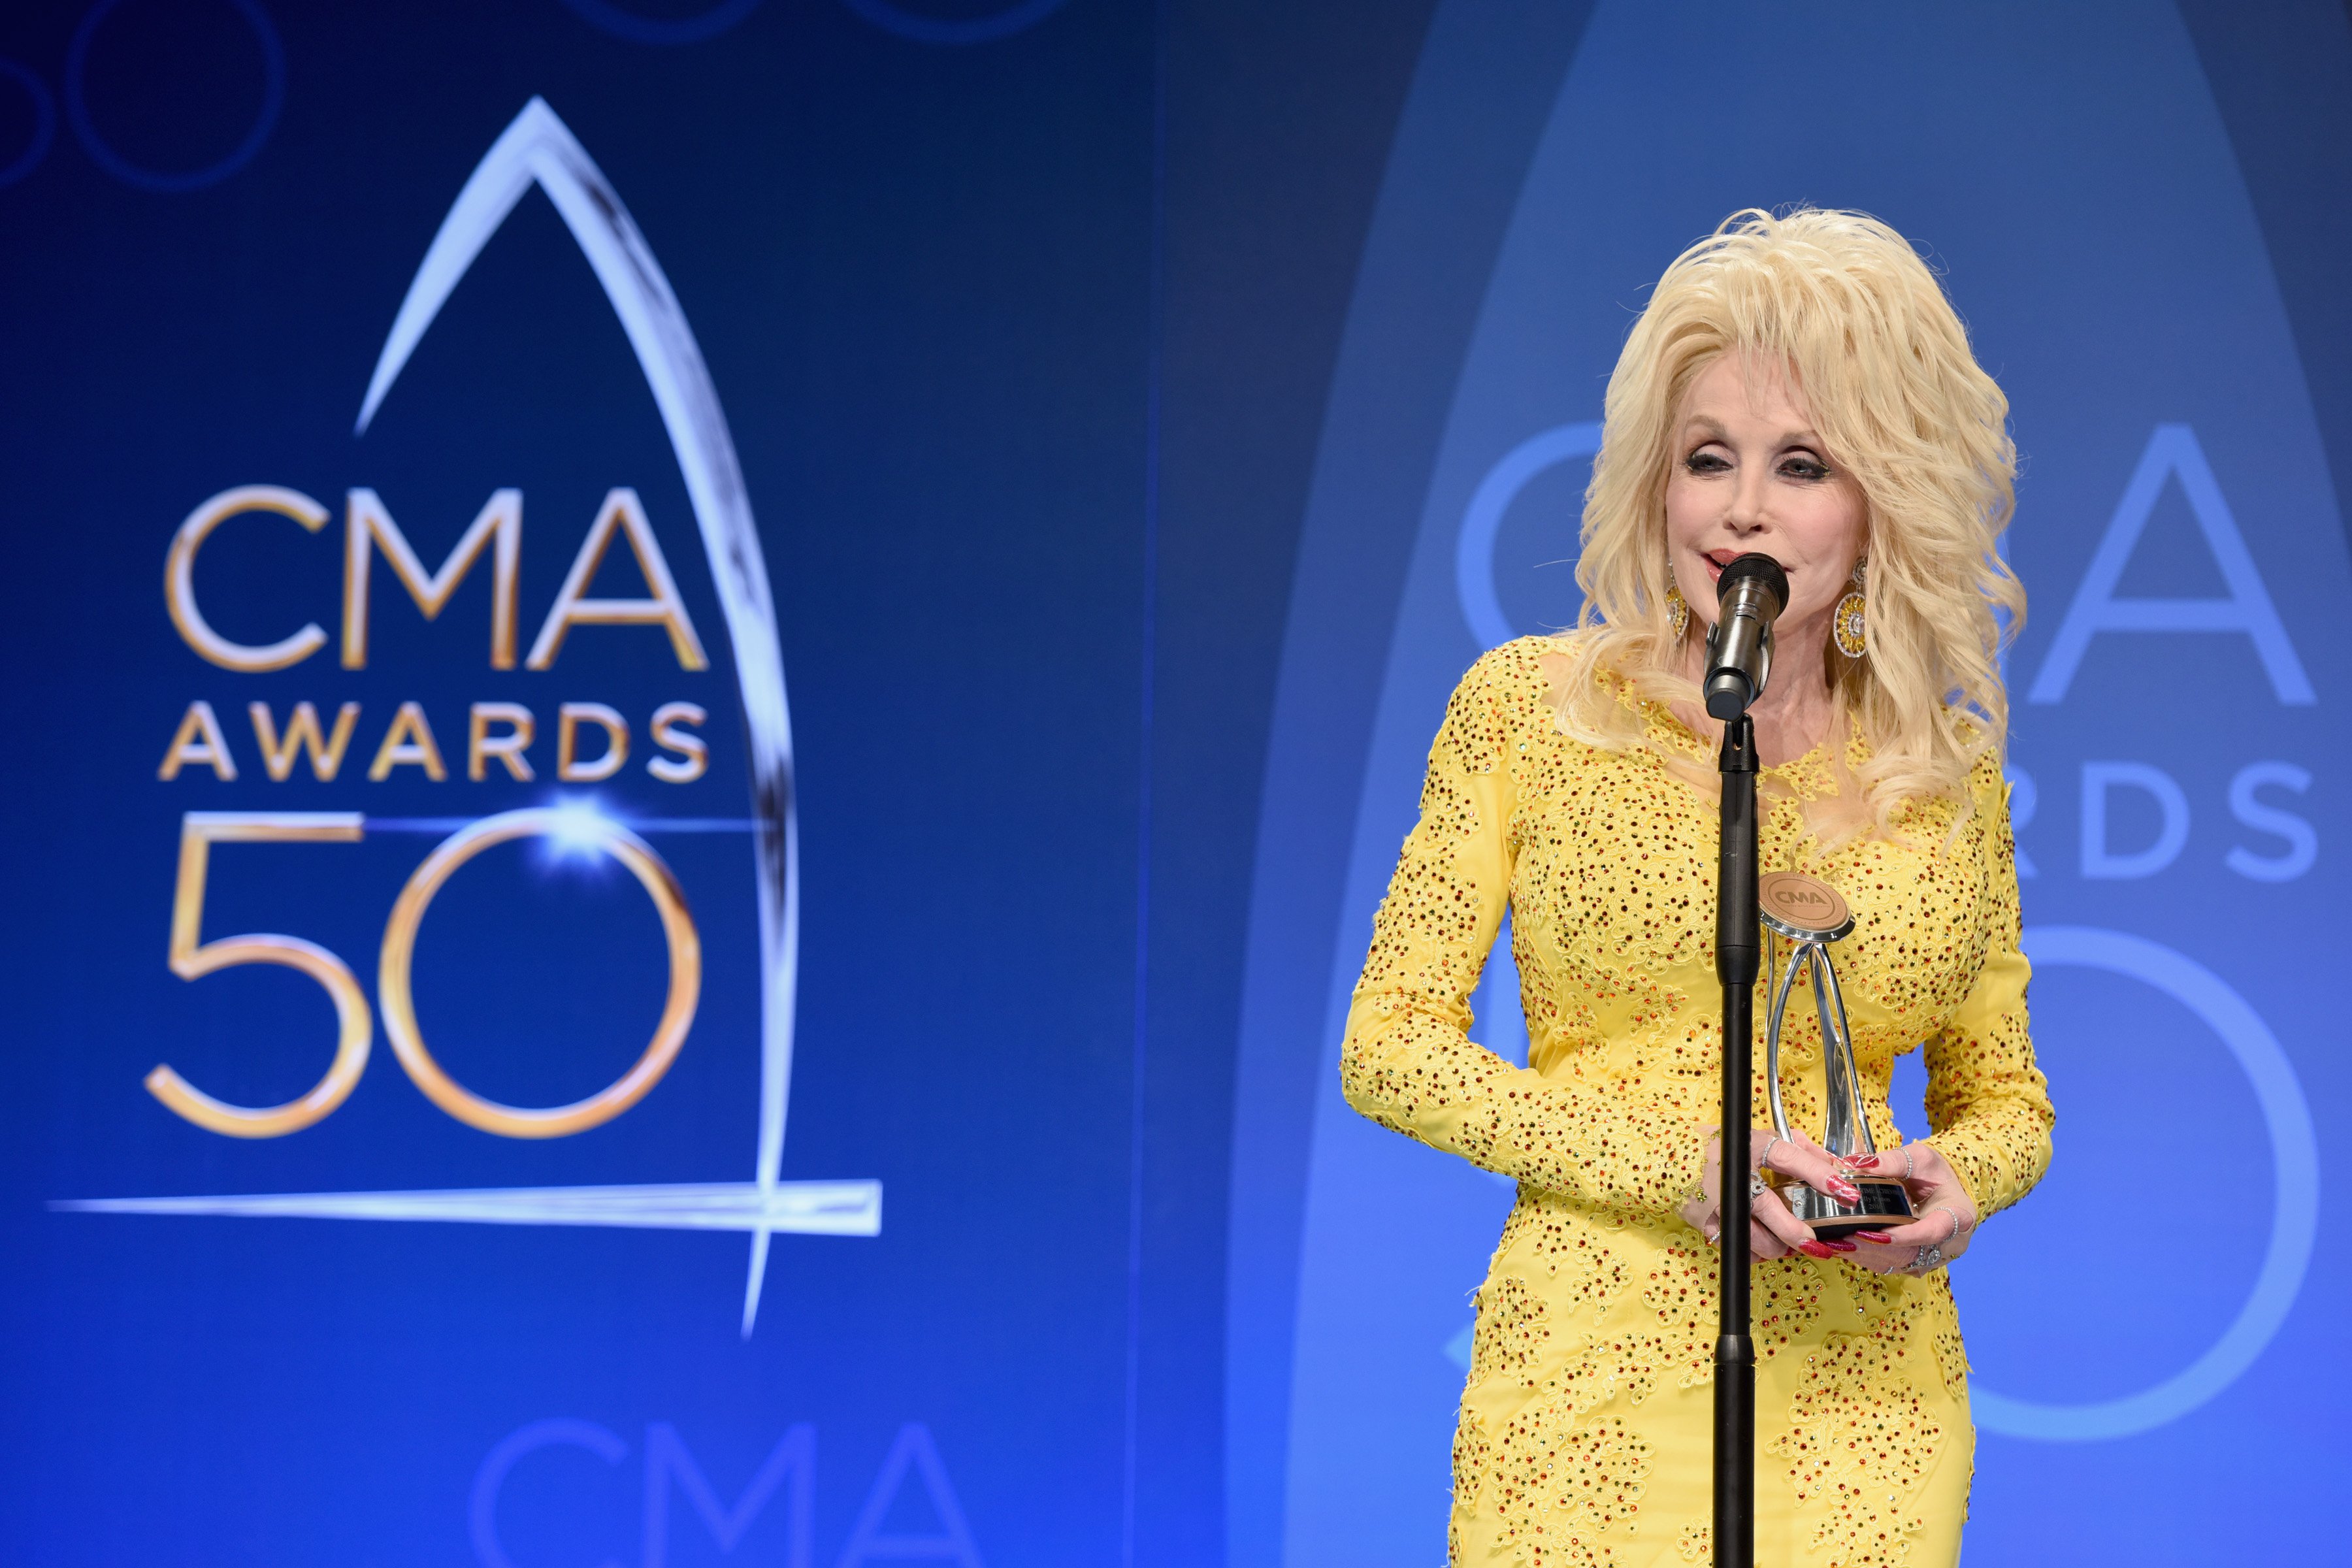 Dolly Parton at the 50th annual CMA Awards. She's speaking into a microphone on stage in a yellow dress.